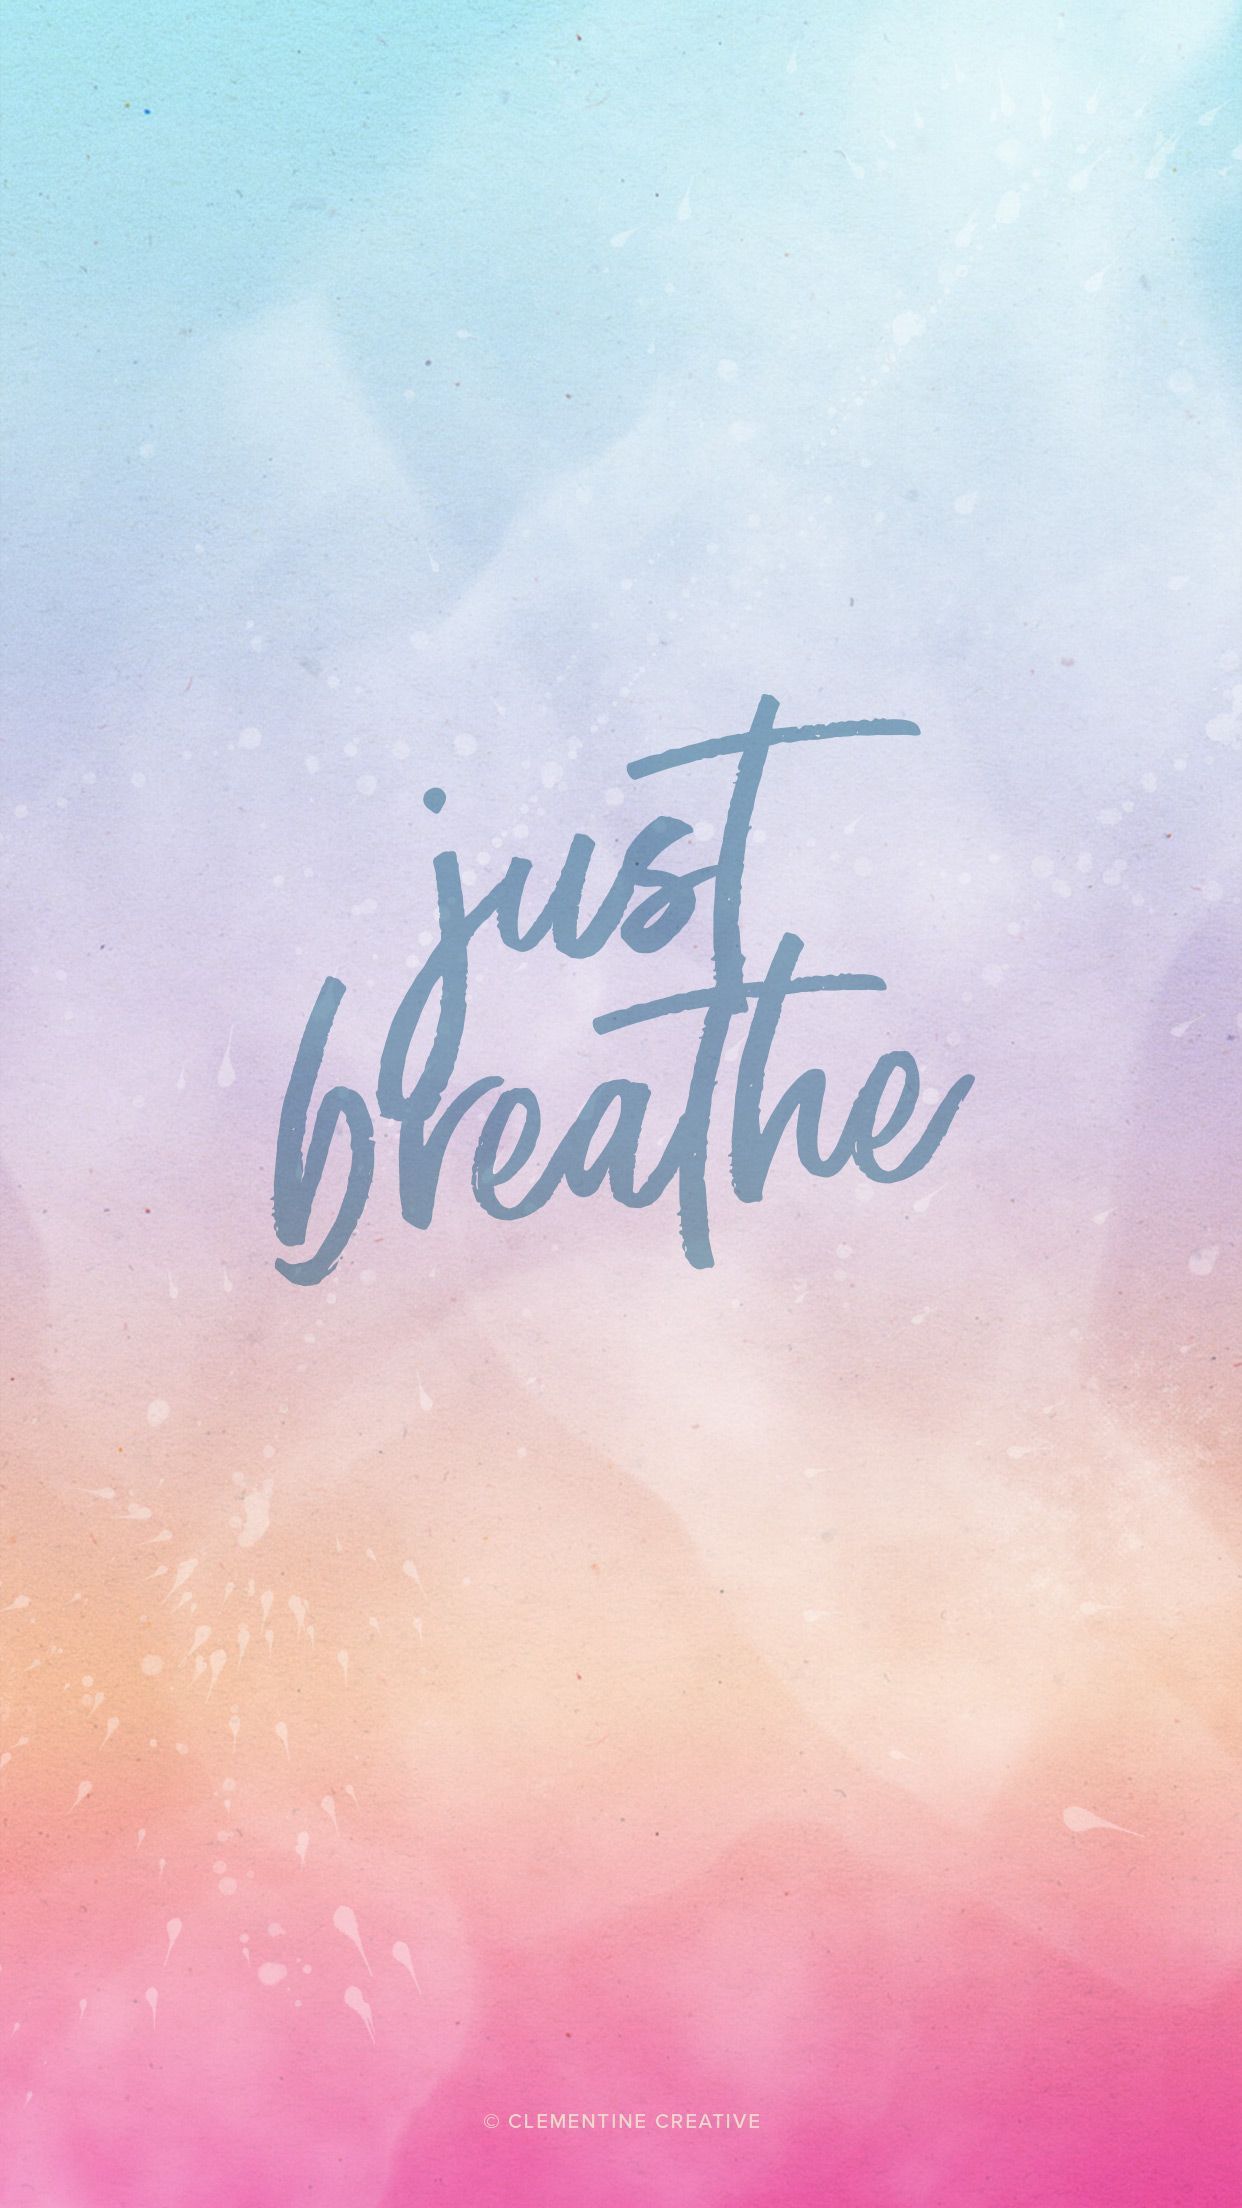 Just Breathe Desktop, Tablet and Mobile Wallpaper. Wallpaper iphone quotes, Phone wallpaper quotes, Wallpaper quotes